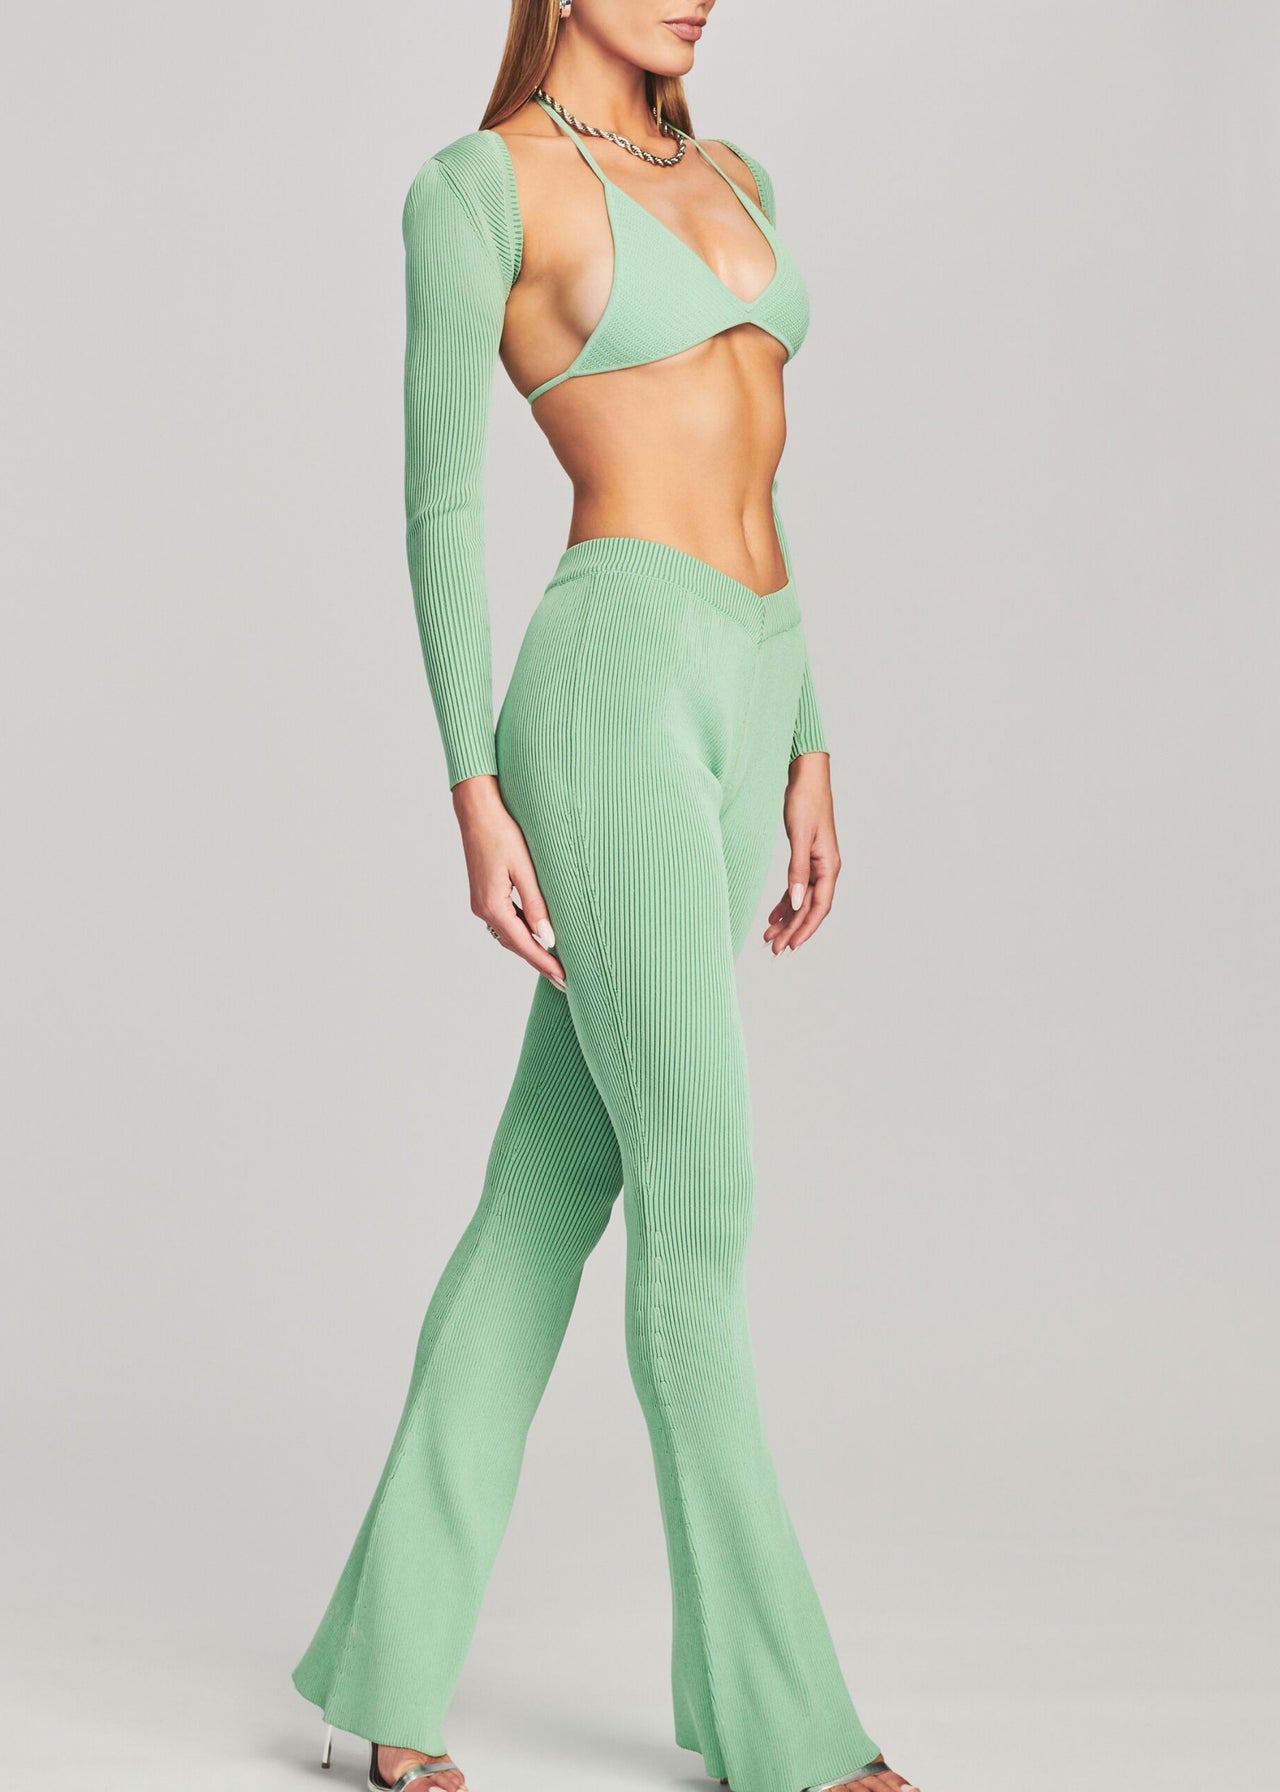 Ribbed Flared Pants - Mint green - Ladies